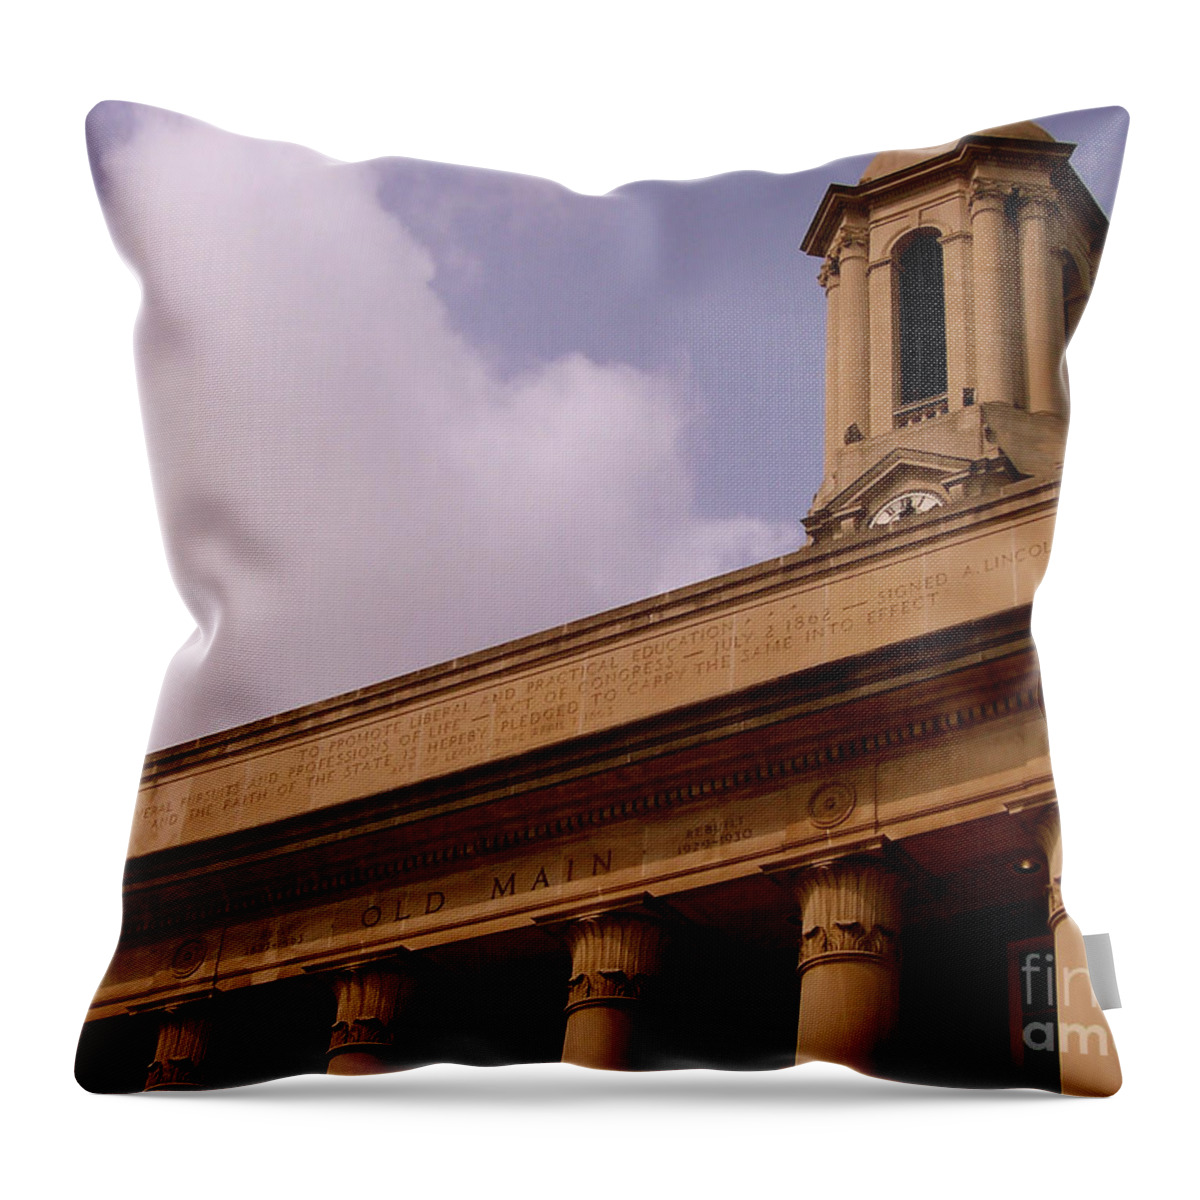 old Main Throw Pillow featuring the photograph Old Main by Mark Ali